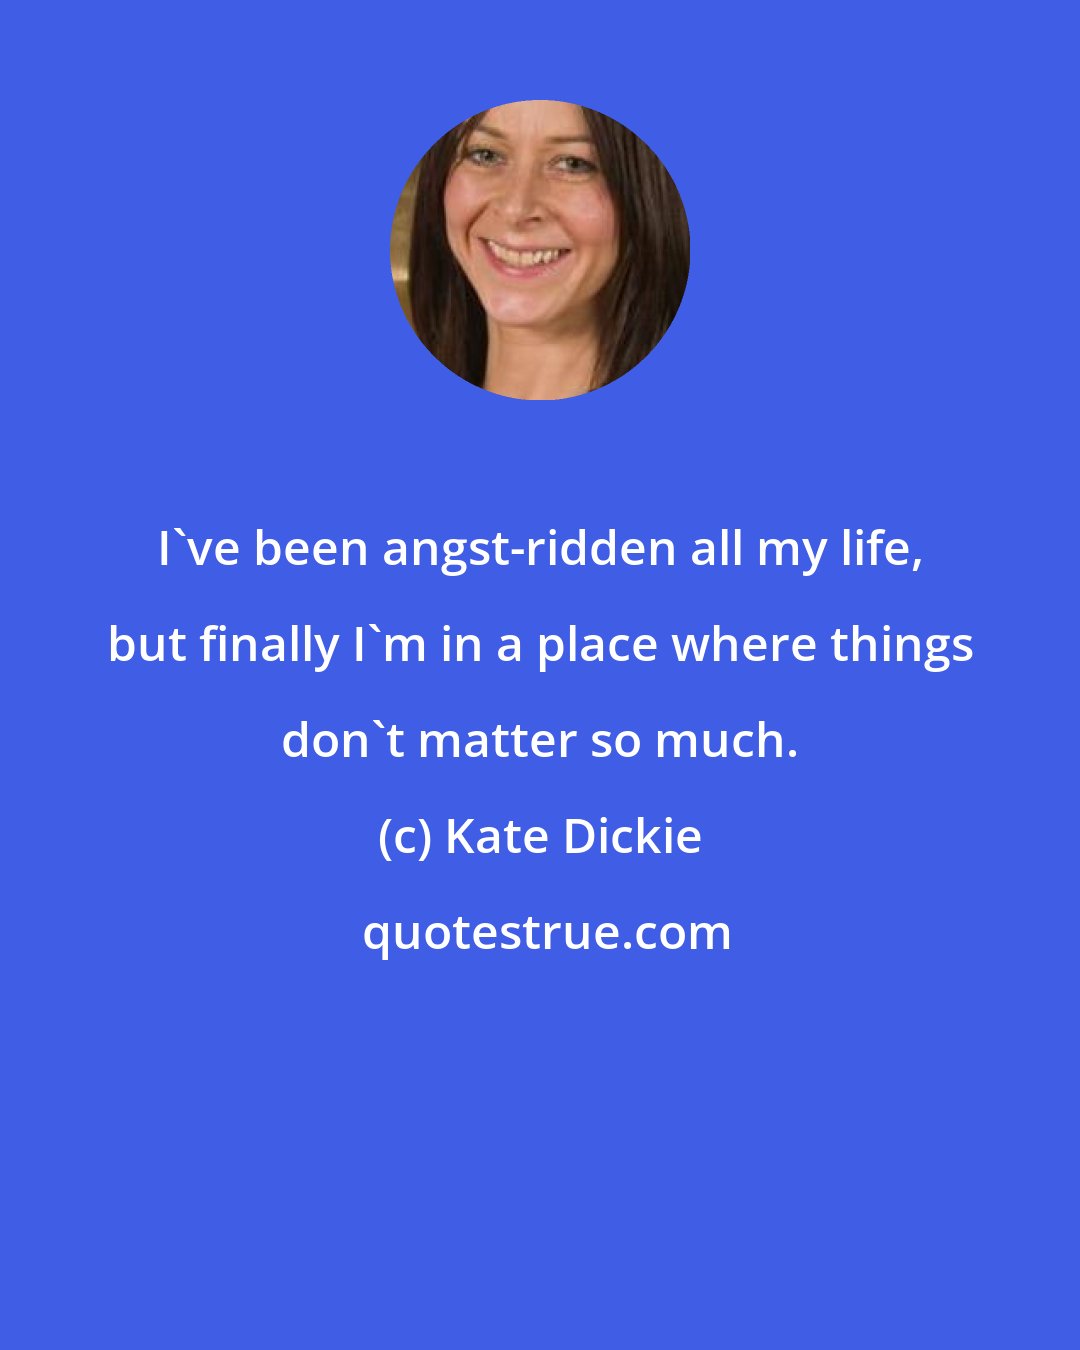 Kate Dickie: I've been angst-ridden all my life, but finally I'm in a place where things don't matter so much.